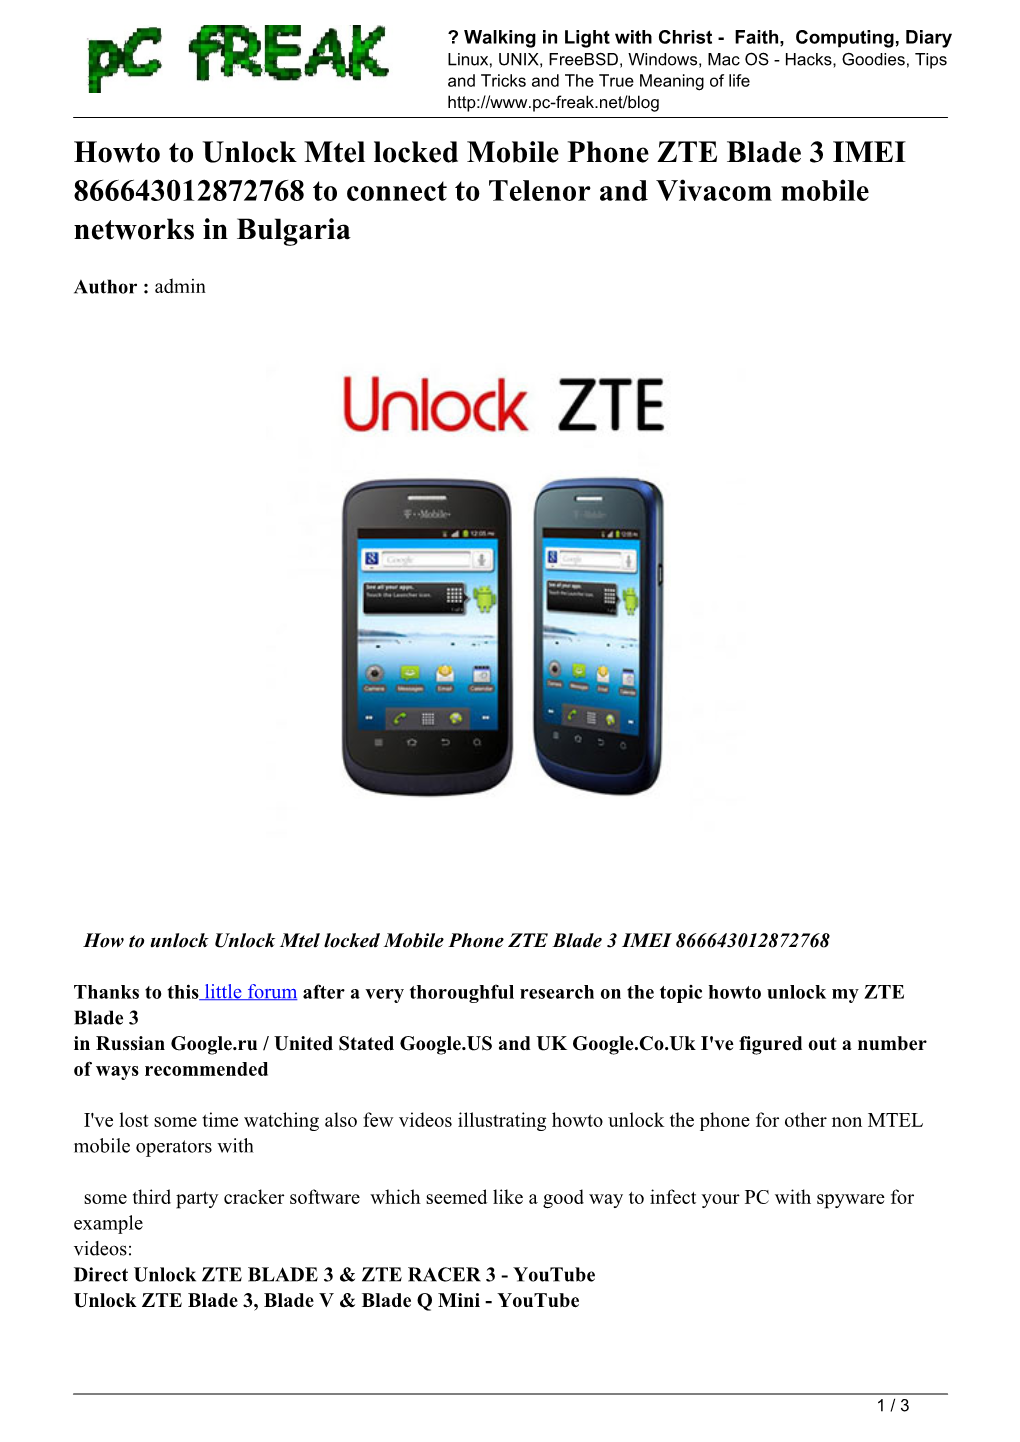 Howto to Unlock Mtel Locked Mobile Phone ZTE Blade 3 IMEI 866643012872768 to Connect to Telenor and Vivacom Mobile Networks in Bulgaria